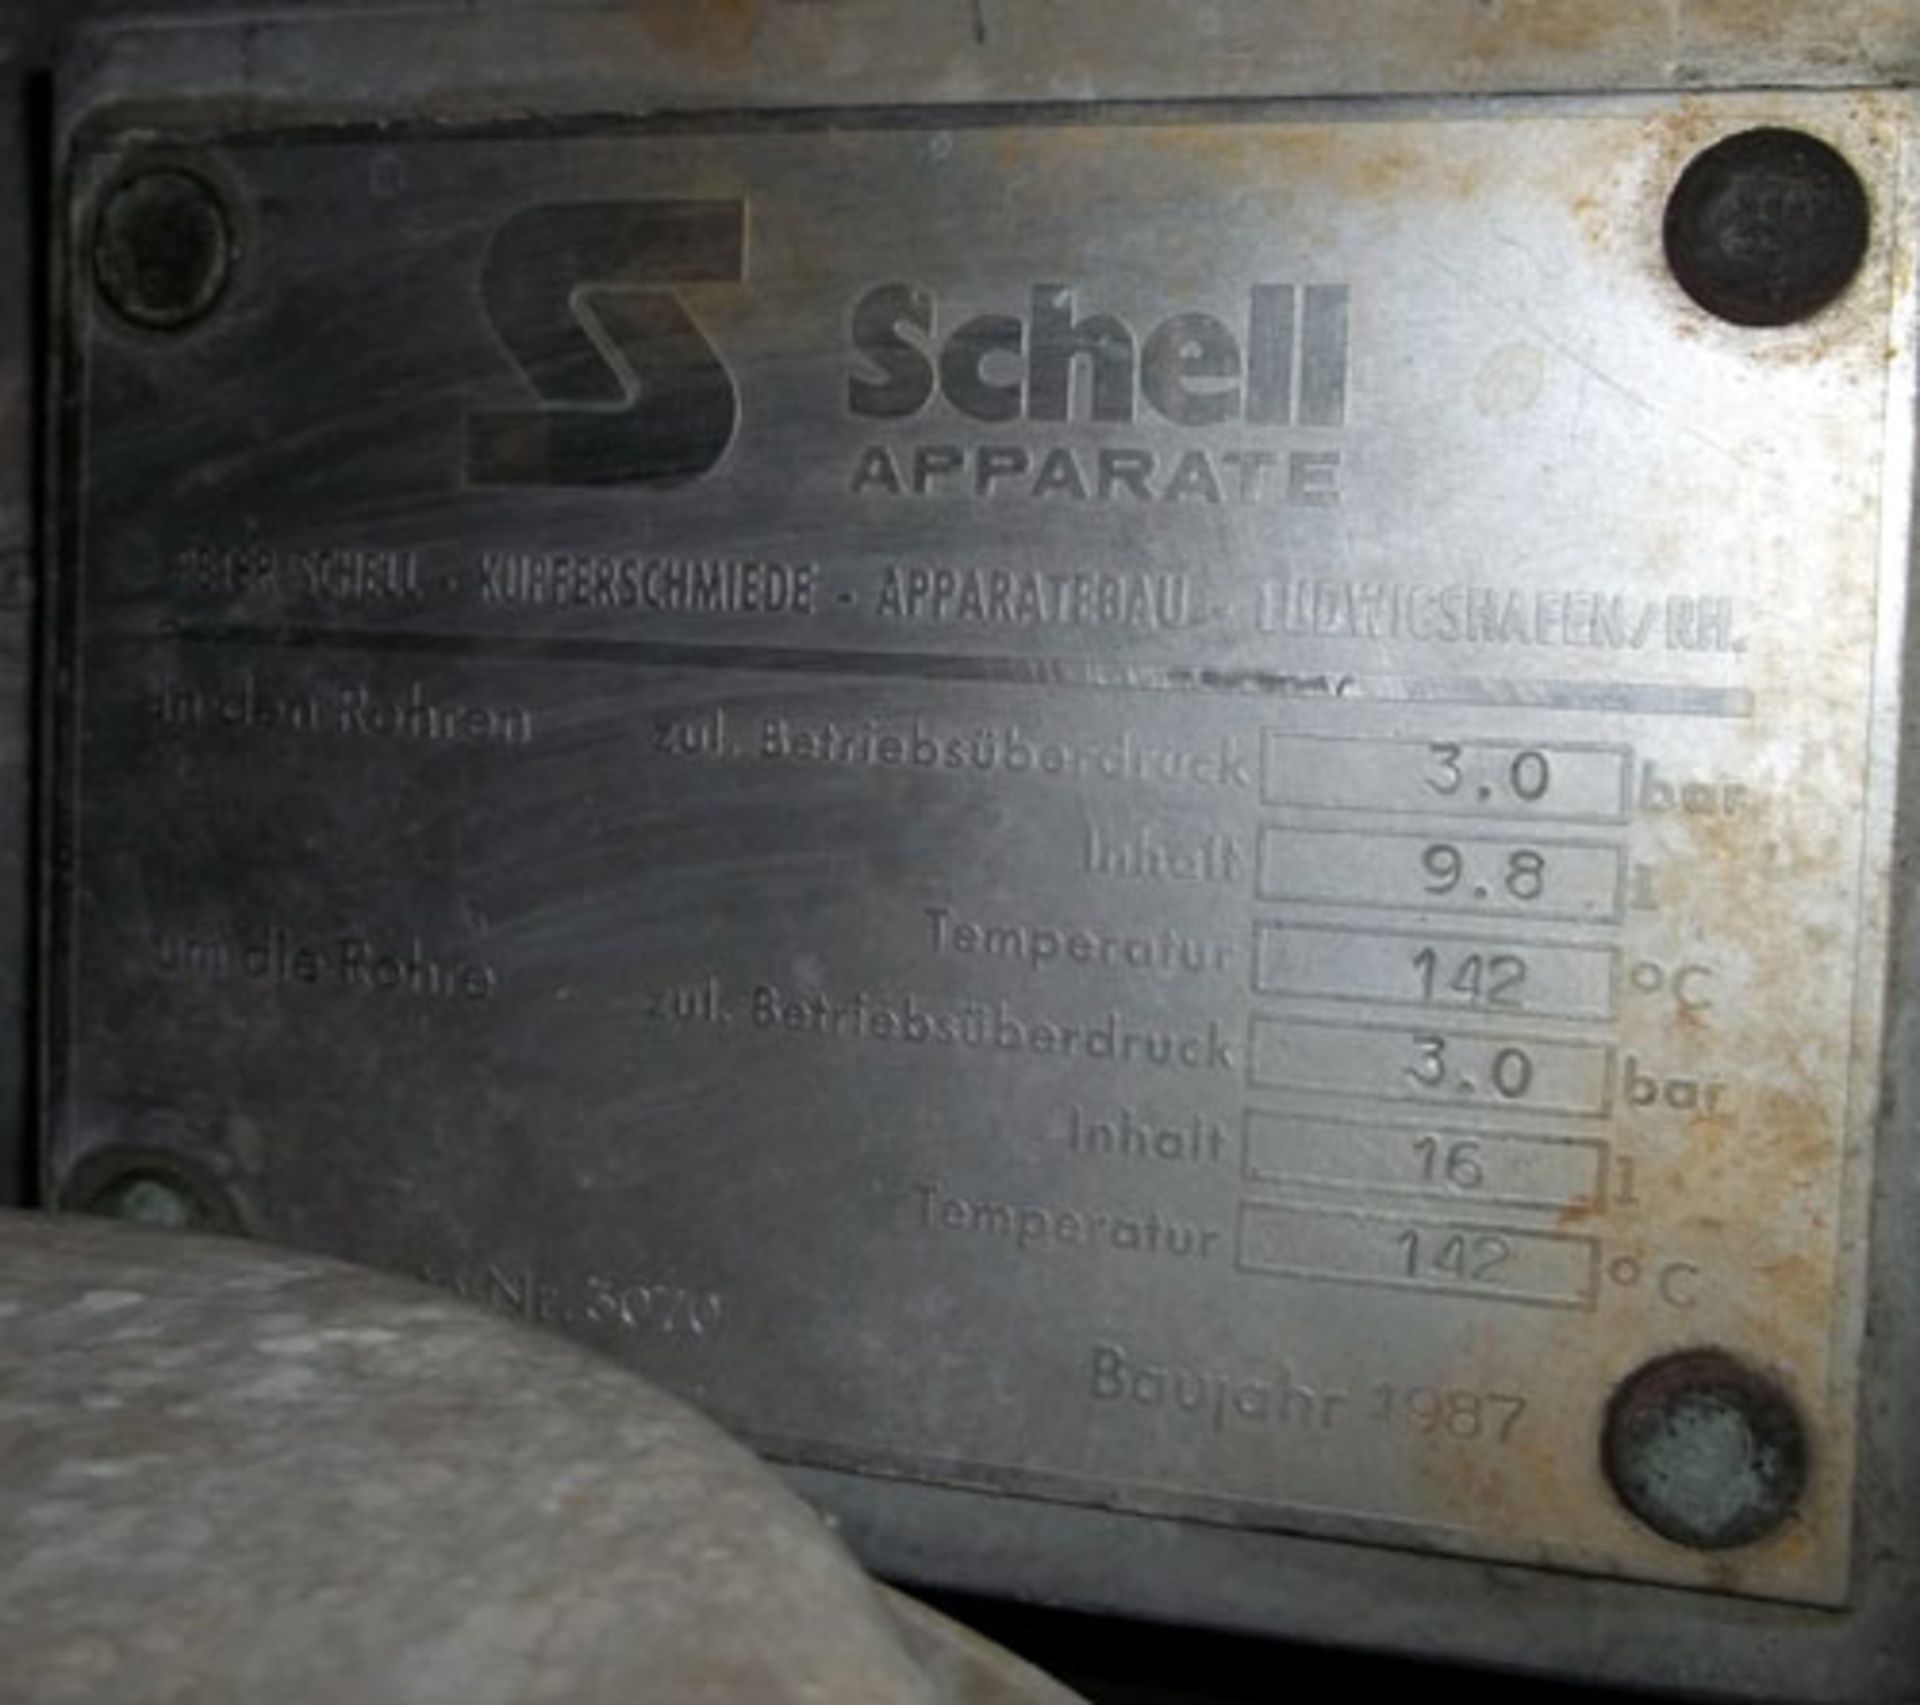 Schell Apparate Shell & Tube Heat Exchanger, Stainless Steel. Shell 16 liter rated 3 bar at 142 - Image 3 of 3